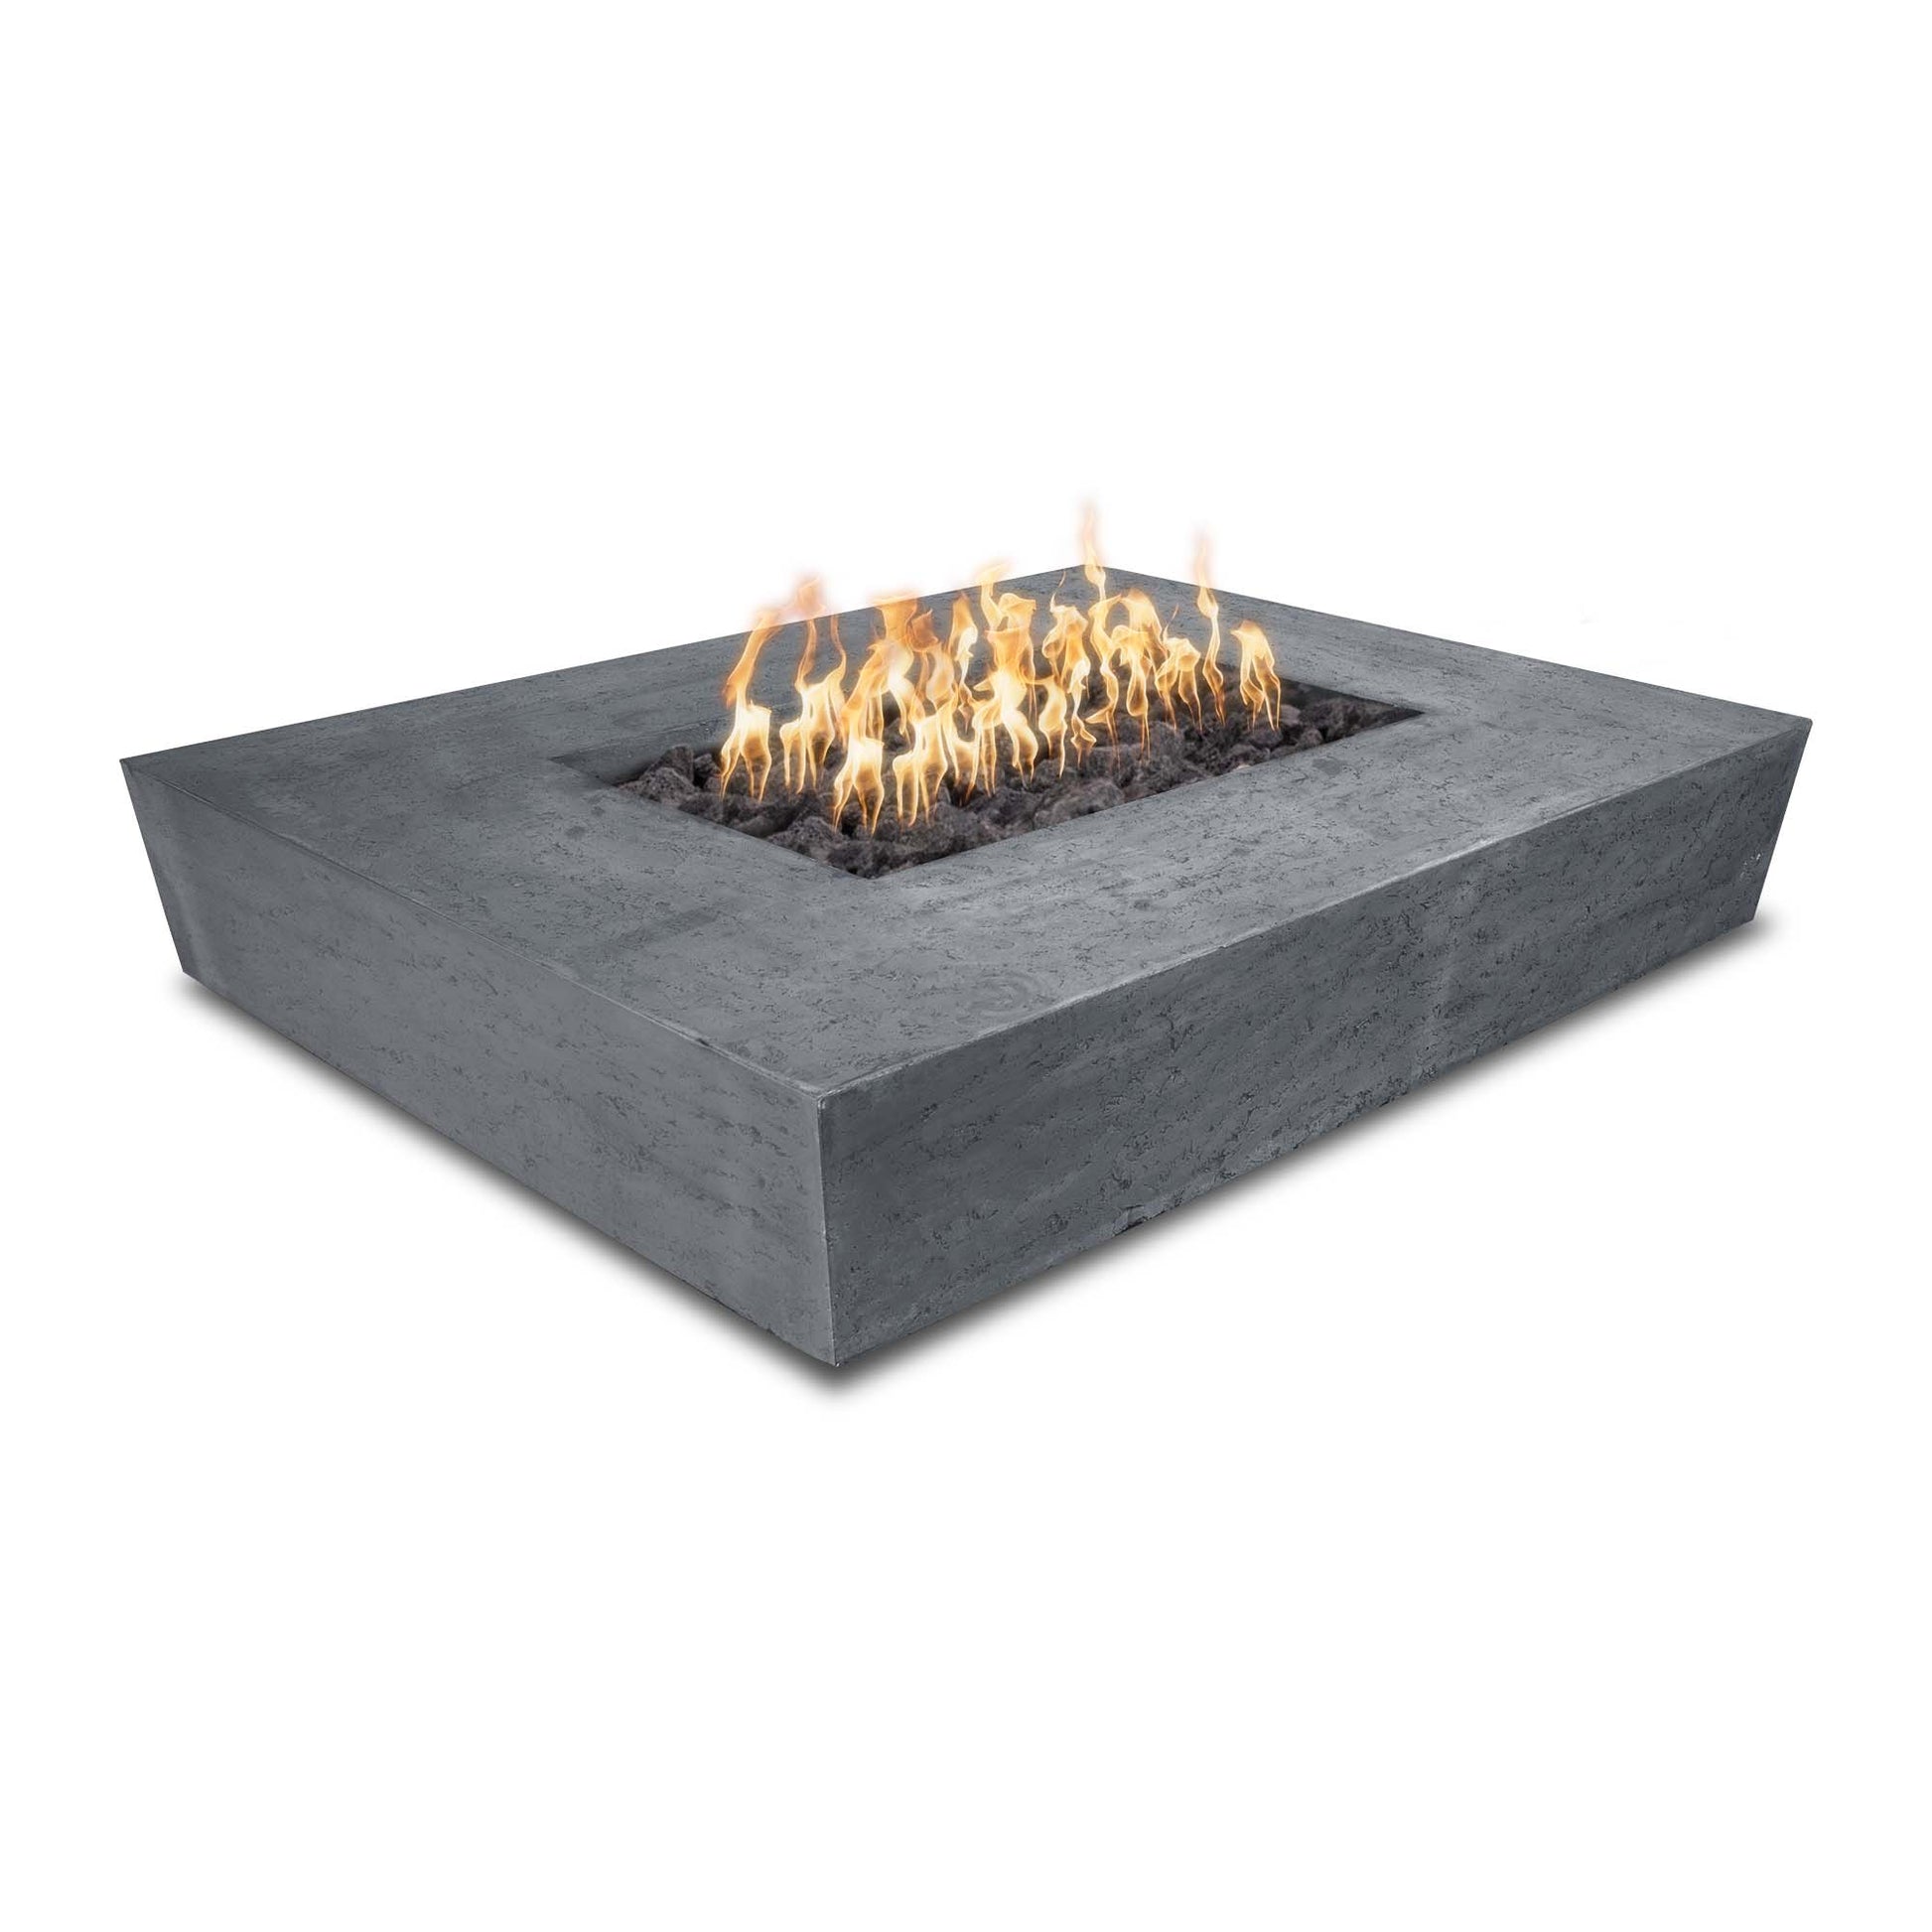 The Outdoor Plus Rectangular Heiko 58" Metallic Bronze GFRC Concrete Natural Gas Fire Pit with Flame Sense with Spark Ignition